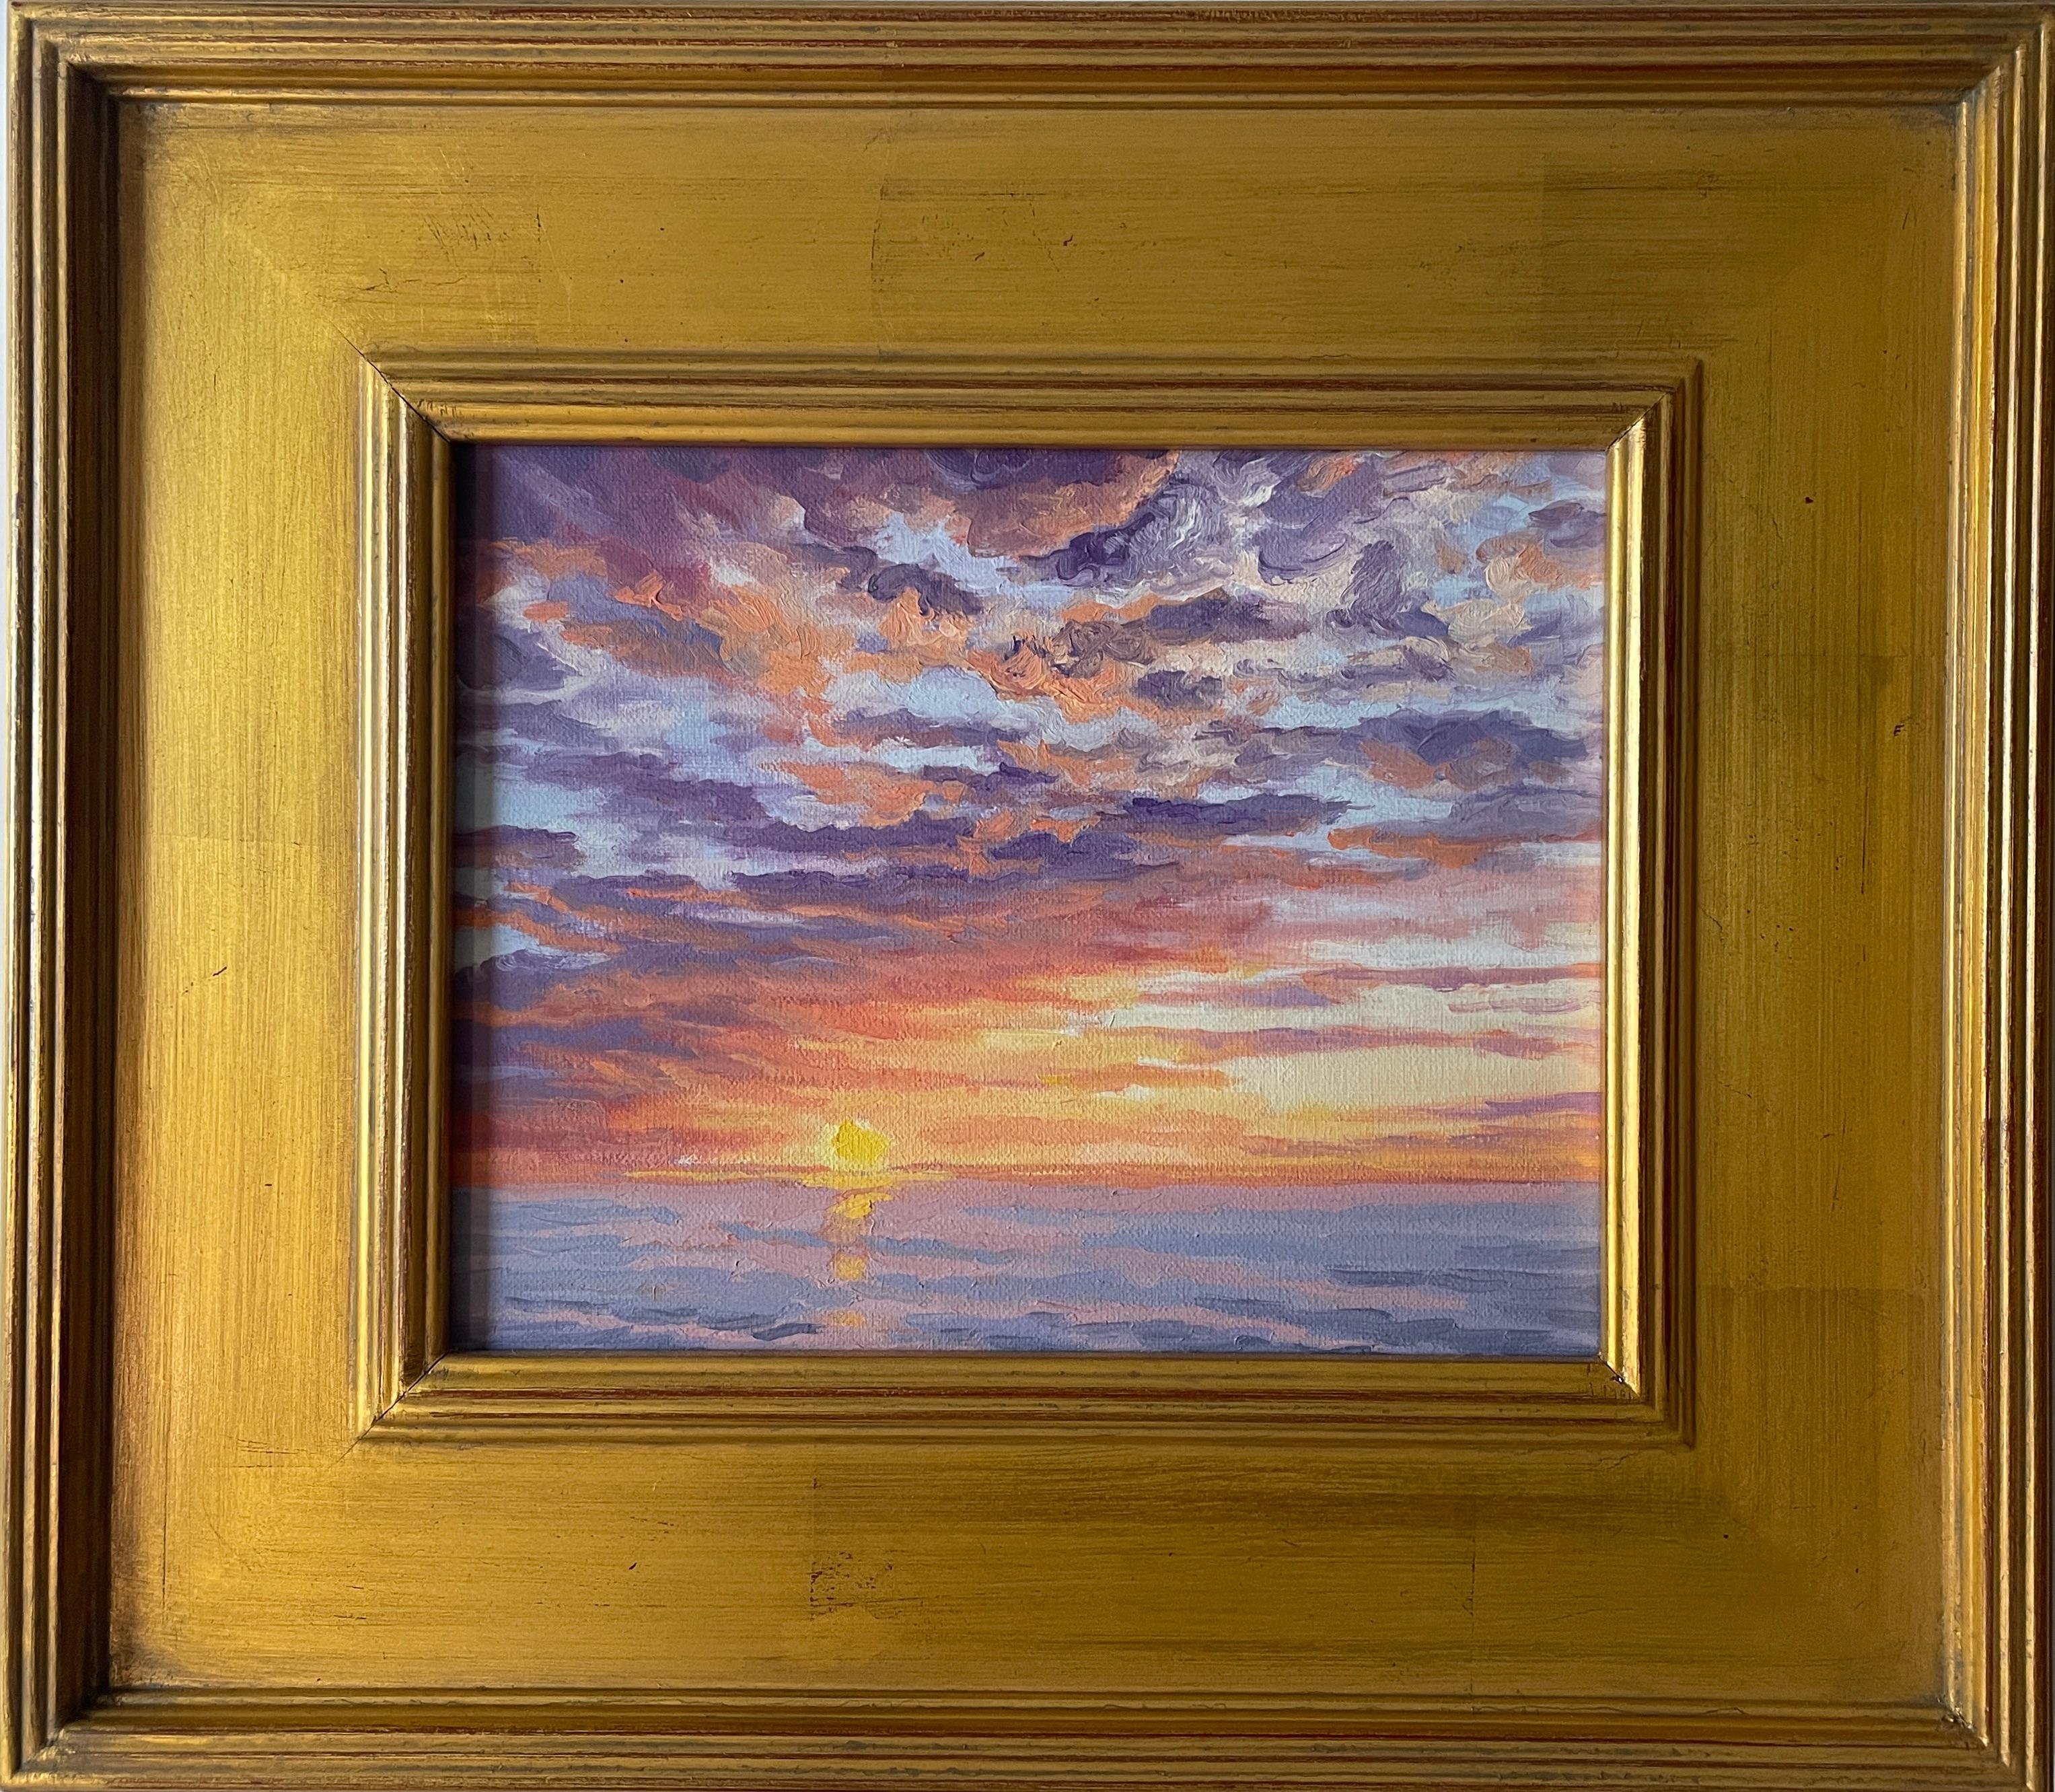 Carl Scorza Landscape Painting - As the Sun Drops Below the Horizon. Title - Last Light of Day